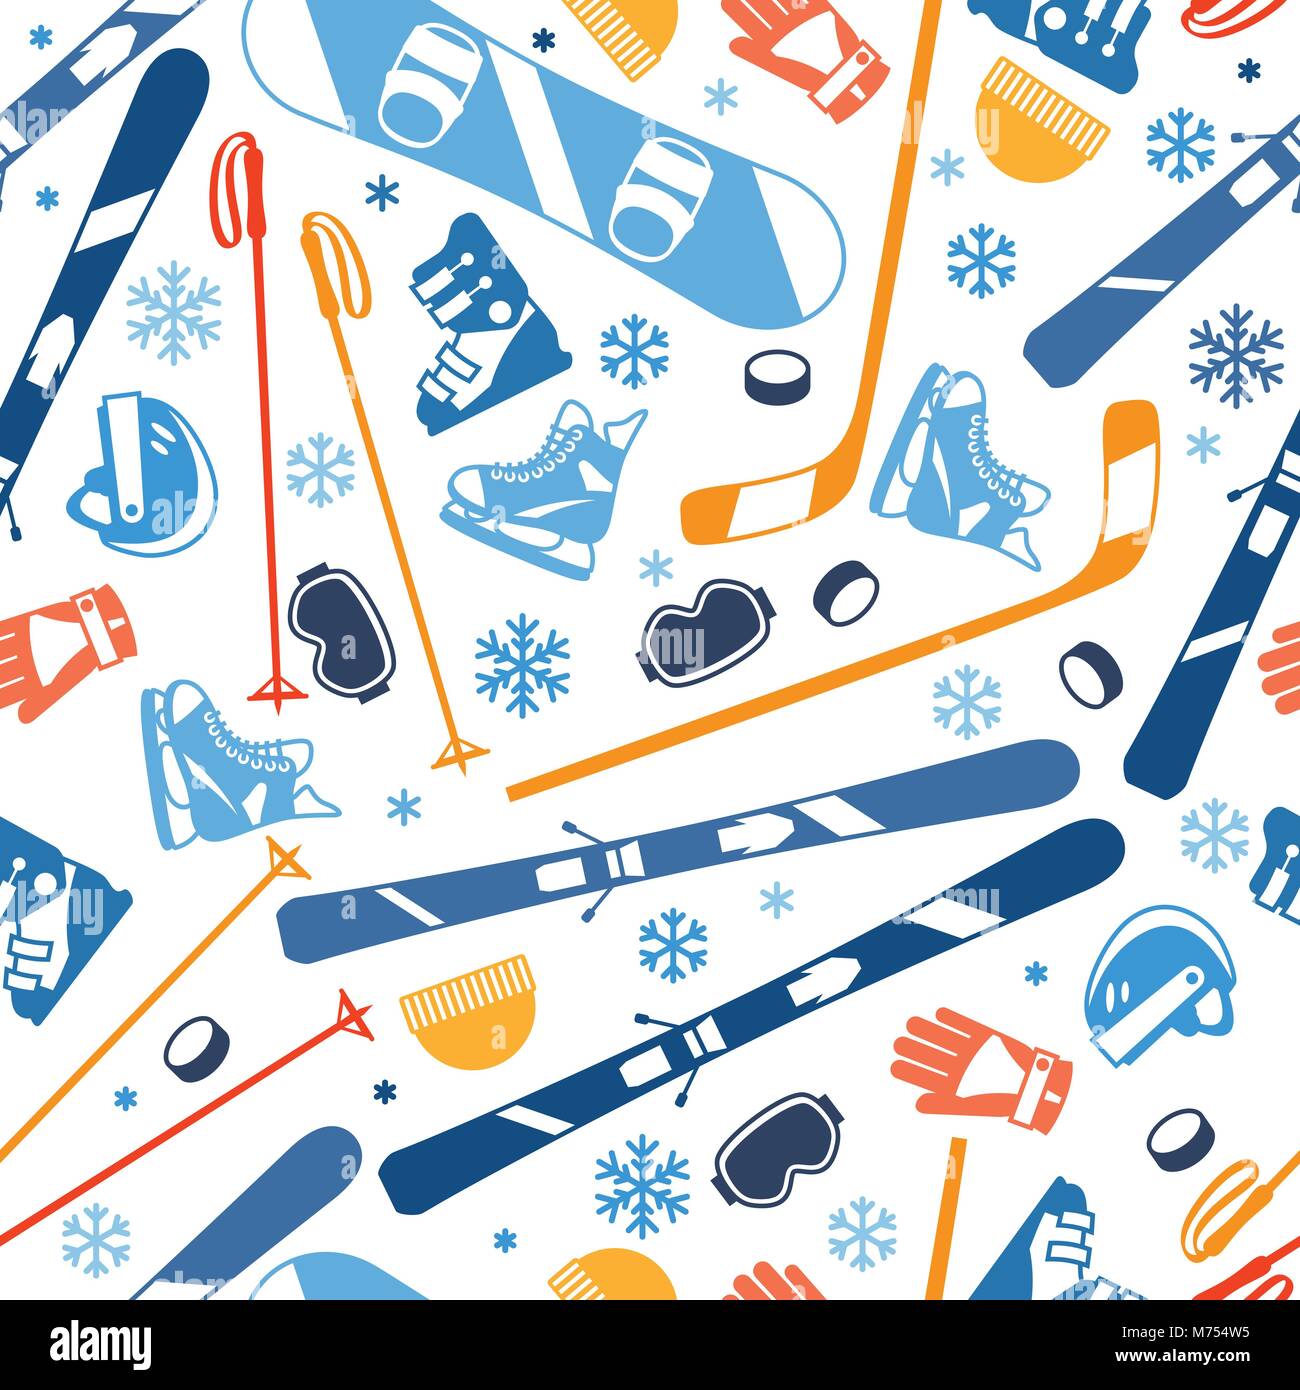 Winter sports seamless pattern with equipment flat icons Stock Vector